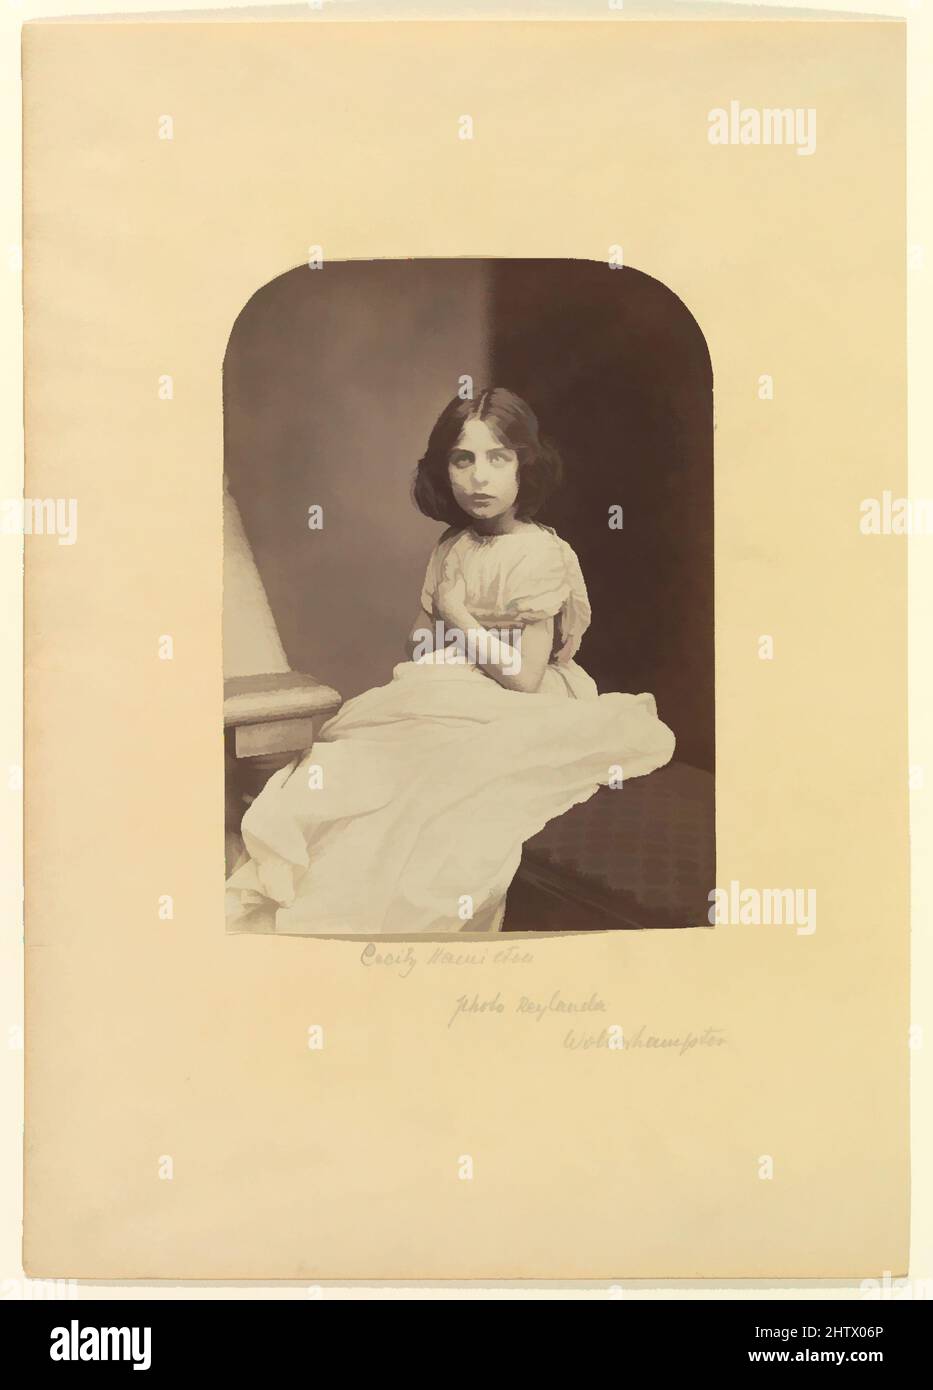 Art inspired by Cecily Hamilton, 1863–1867, Albumen silver print from glass negative, Photographs, Oscar Gustav Rejlander (British, born Sweden, 1813–1875), In 1863 Rejlander visited Freshwater on the Isle of Wight. He photographed the family of his friend Alfred, Lord Tennyson as well, Classic works modernized by Artotop with a splash of modernity. Shapes, color and value, eye-catching visual impact on art. Emotions through freedom of artworks in a contemporary way. A timeless message pursuing a wildly creative new direction. Artists turning to the digital medium and creating the Artotop NFT Stock Photo